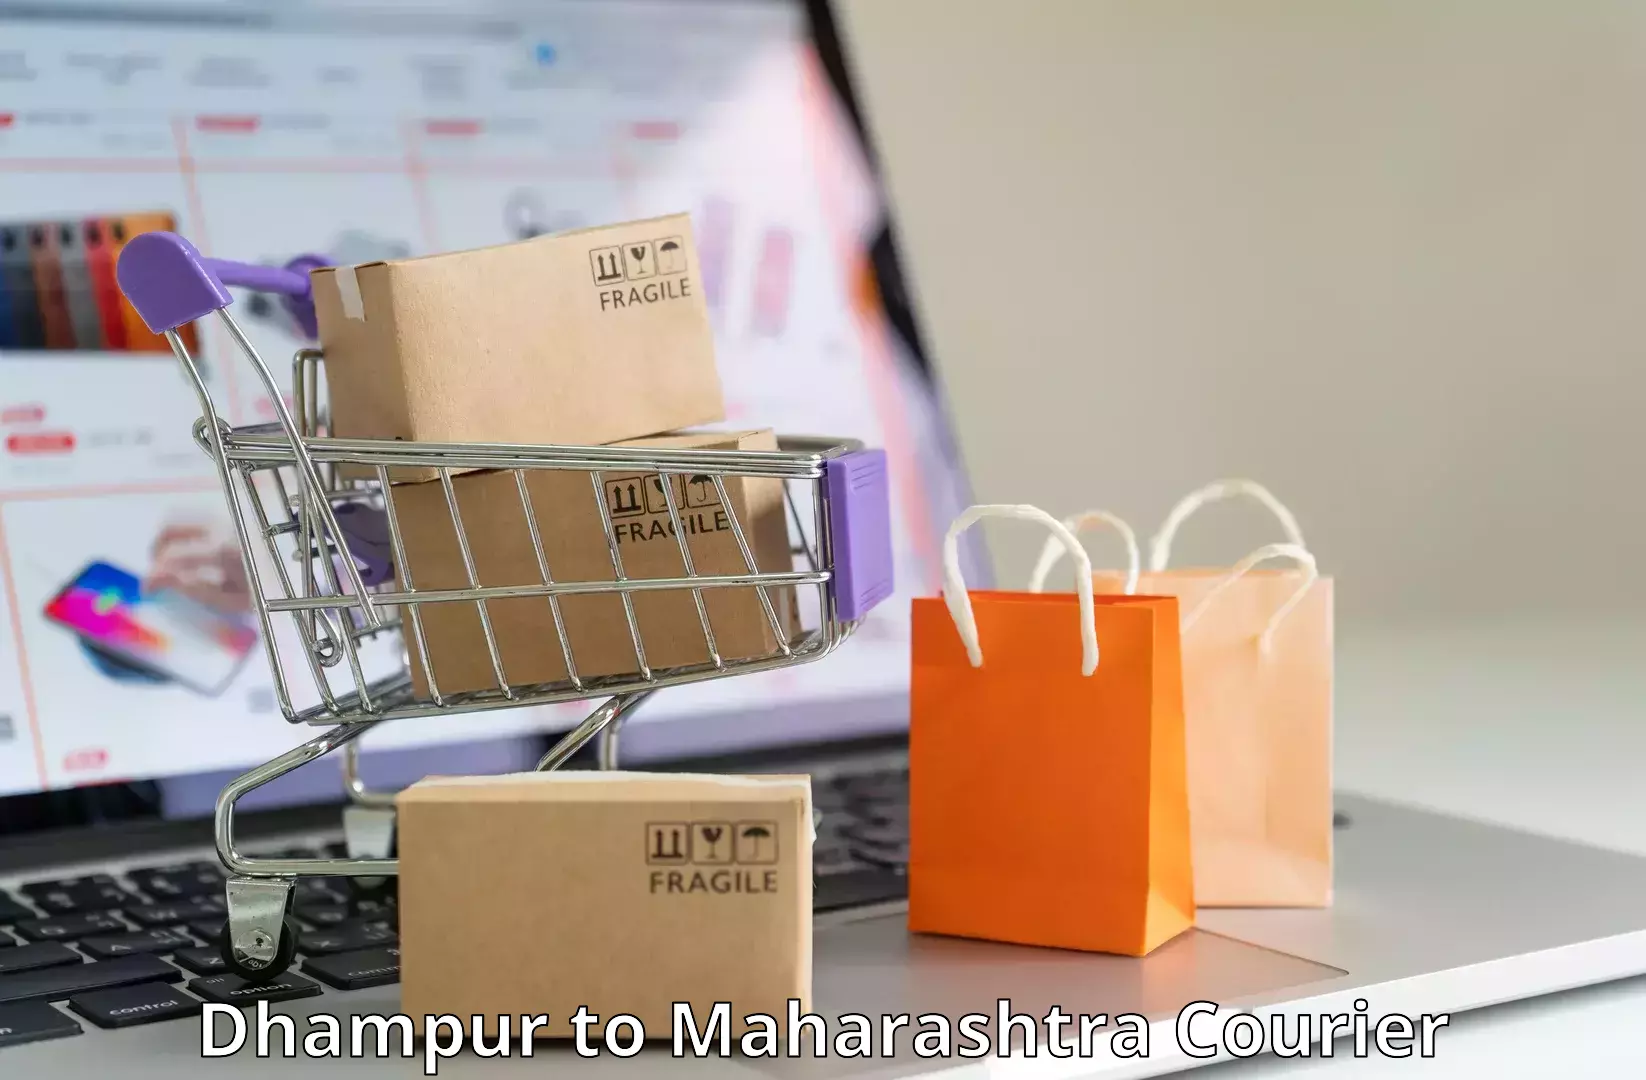 Courier service partnerships Dhampur to Baramati